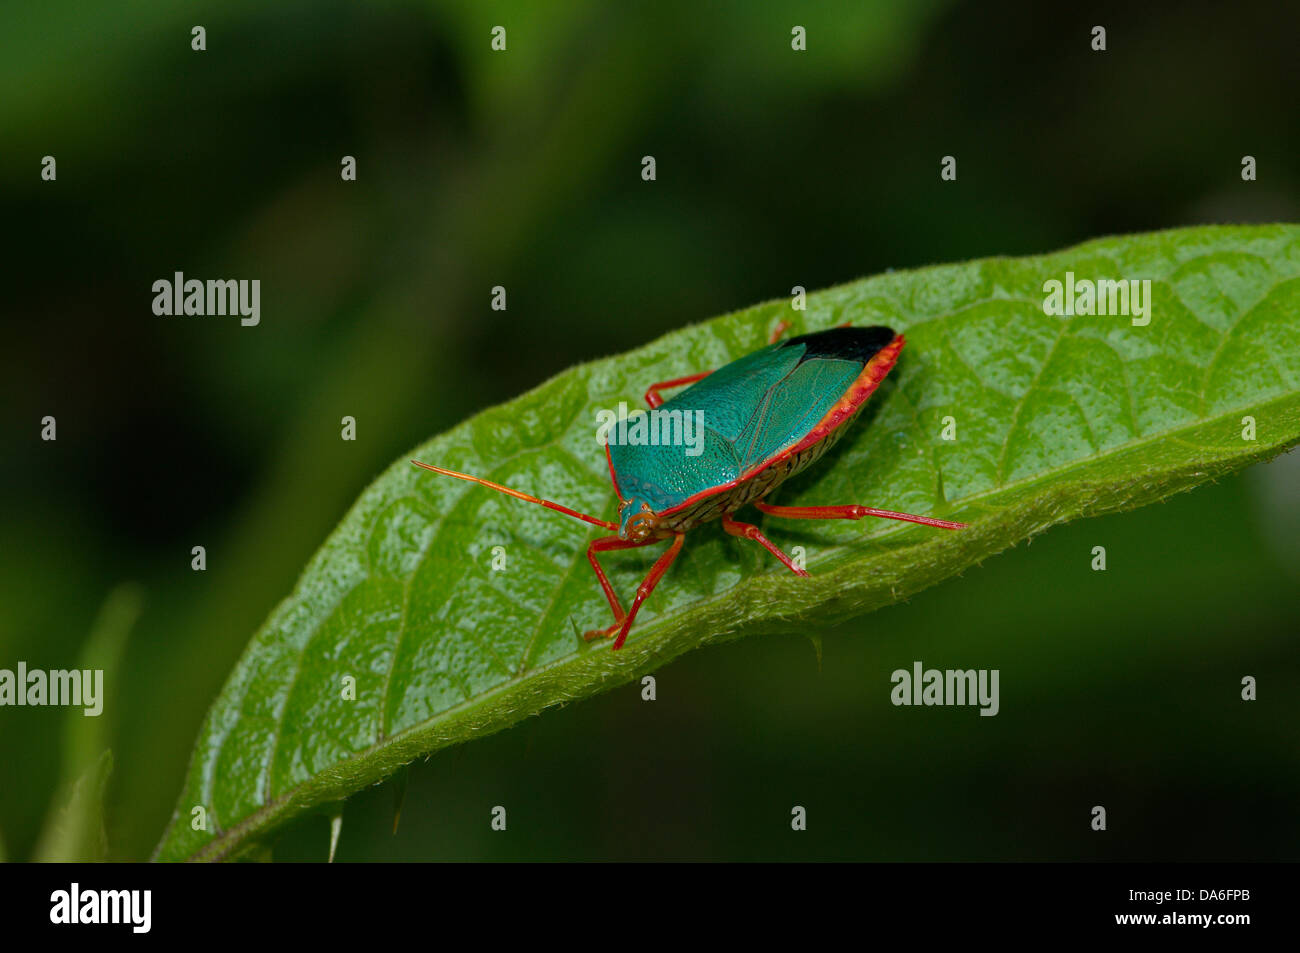 Shield bug, bug, Scutelleridae, Heteroptera, Insect, Insects, red, turquoise, green, animal, animals, fauna, tropical, Costa Ric Stock Photo